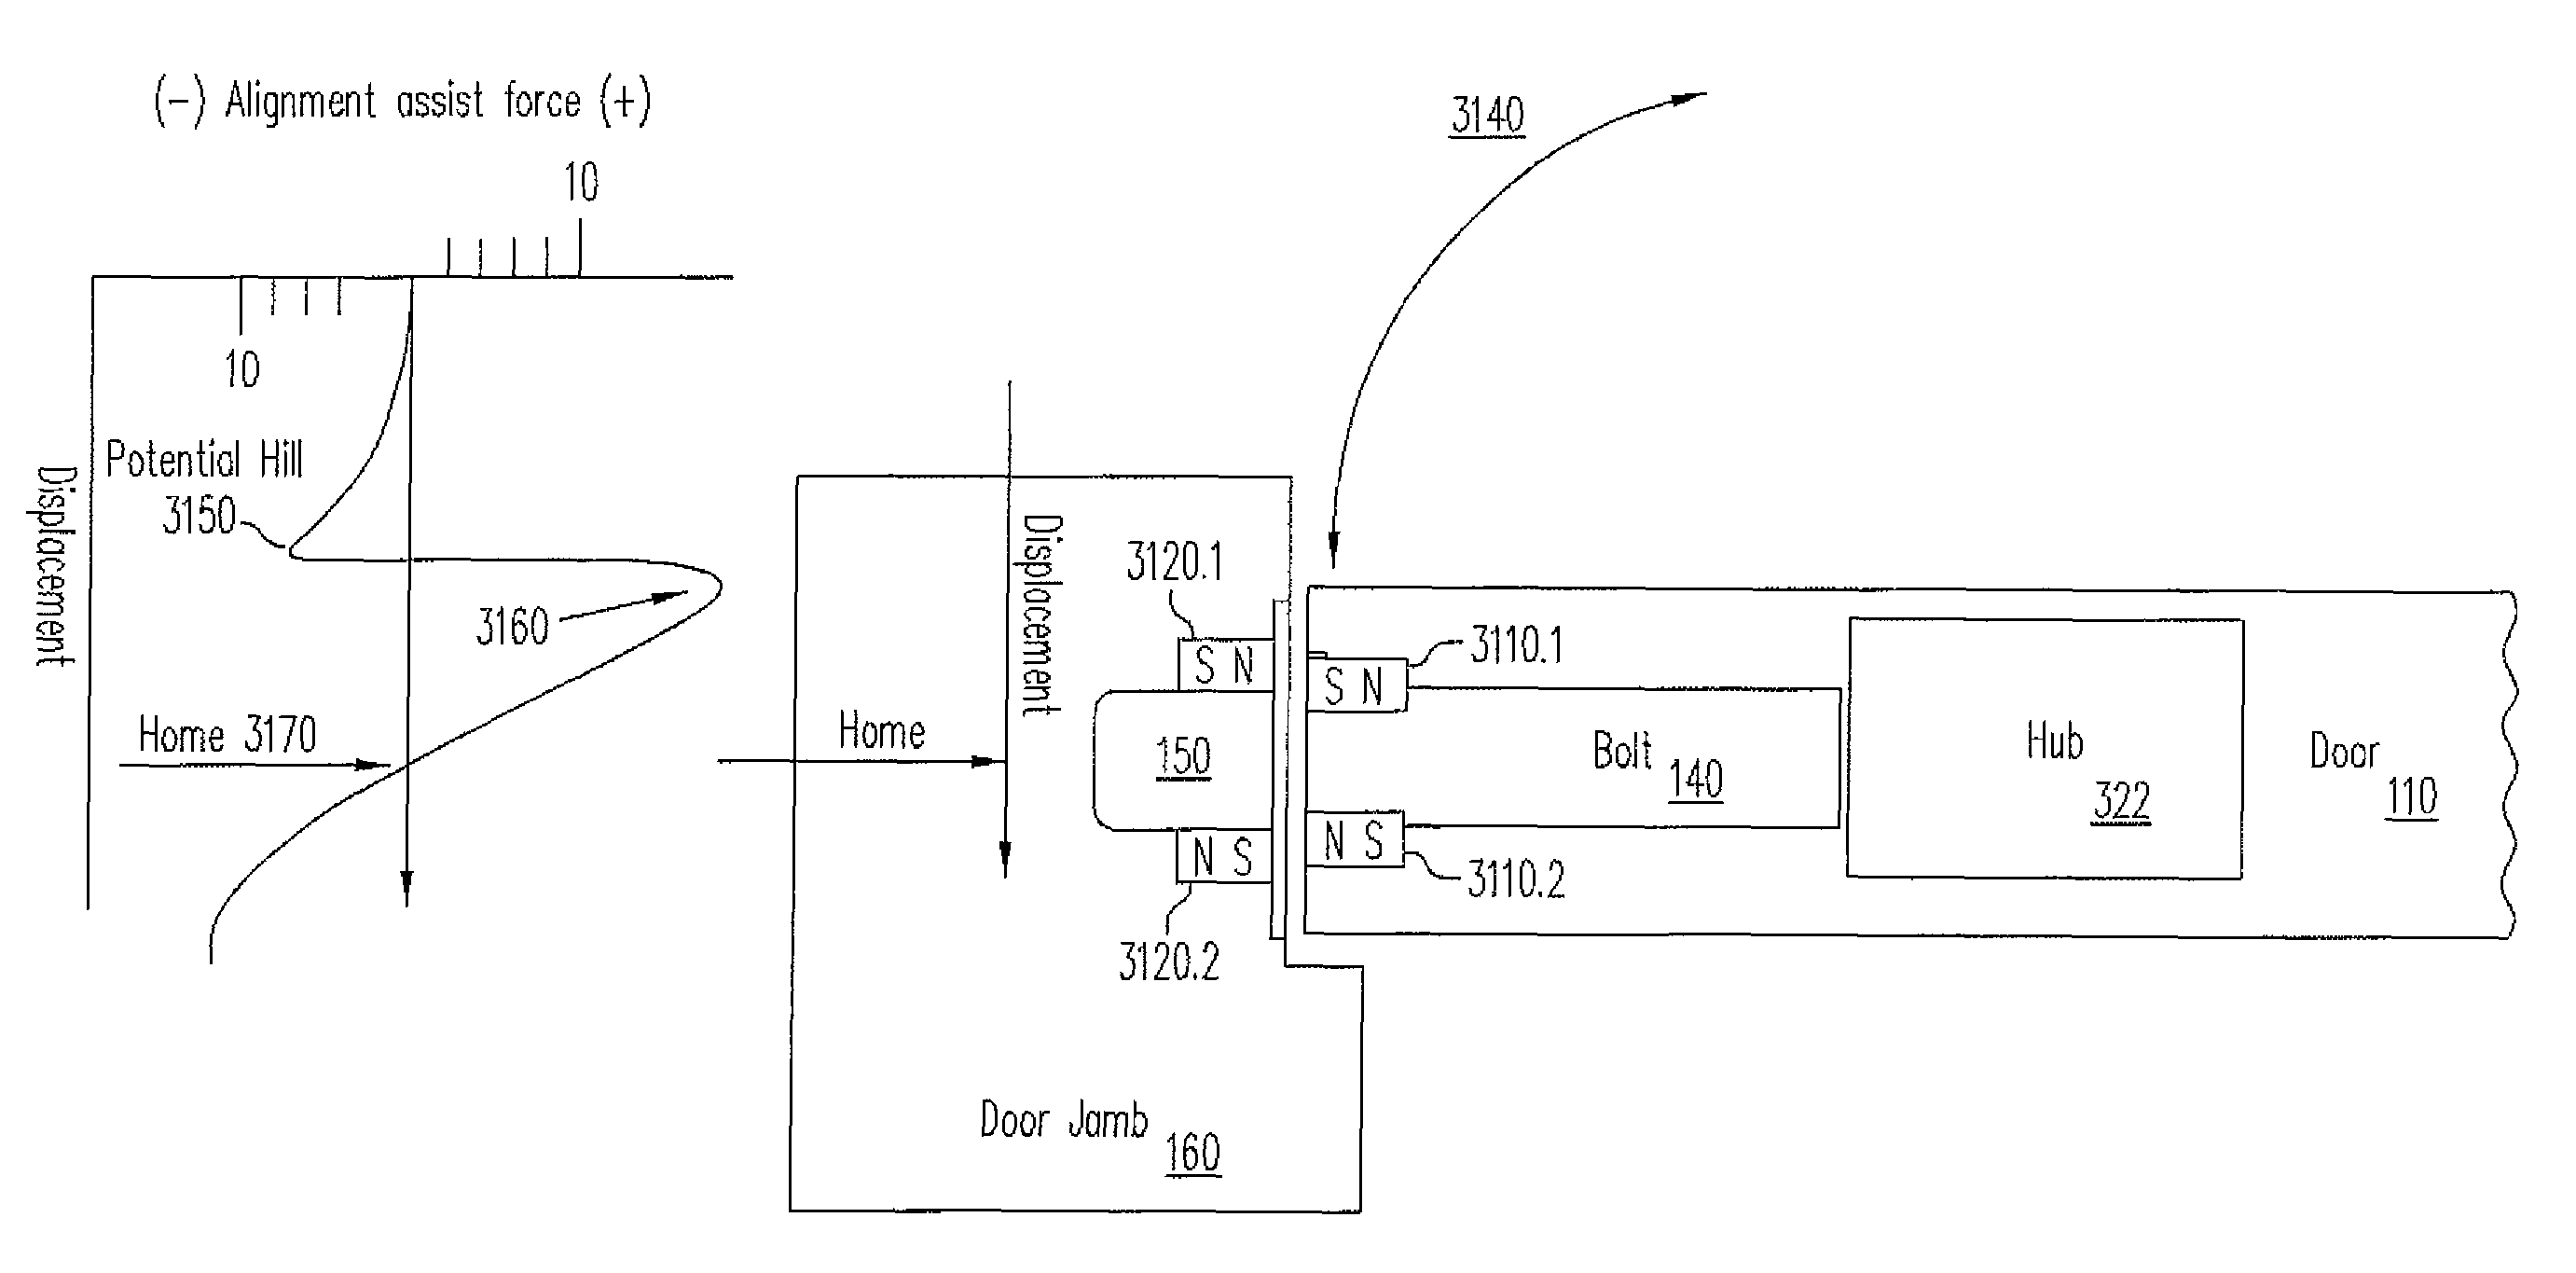 Alignment-related operation and position sensing of electronic and other locks and other objects